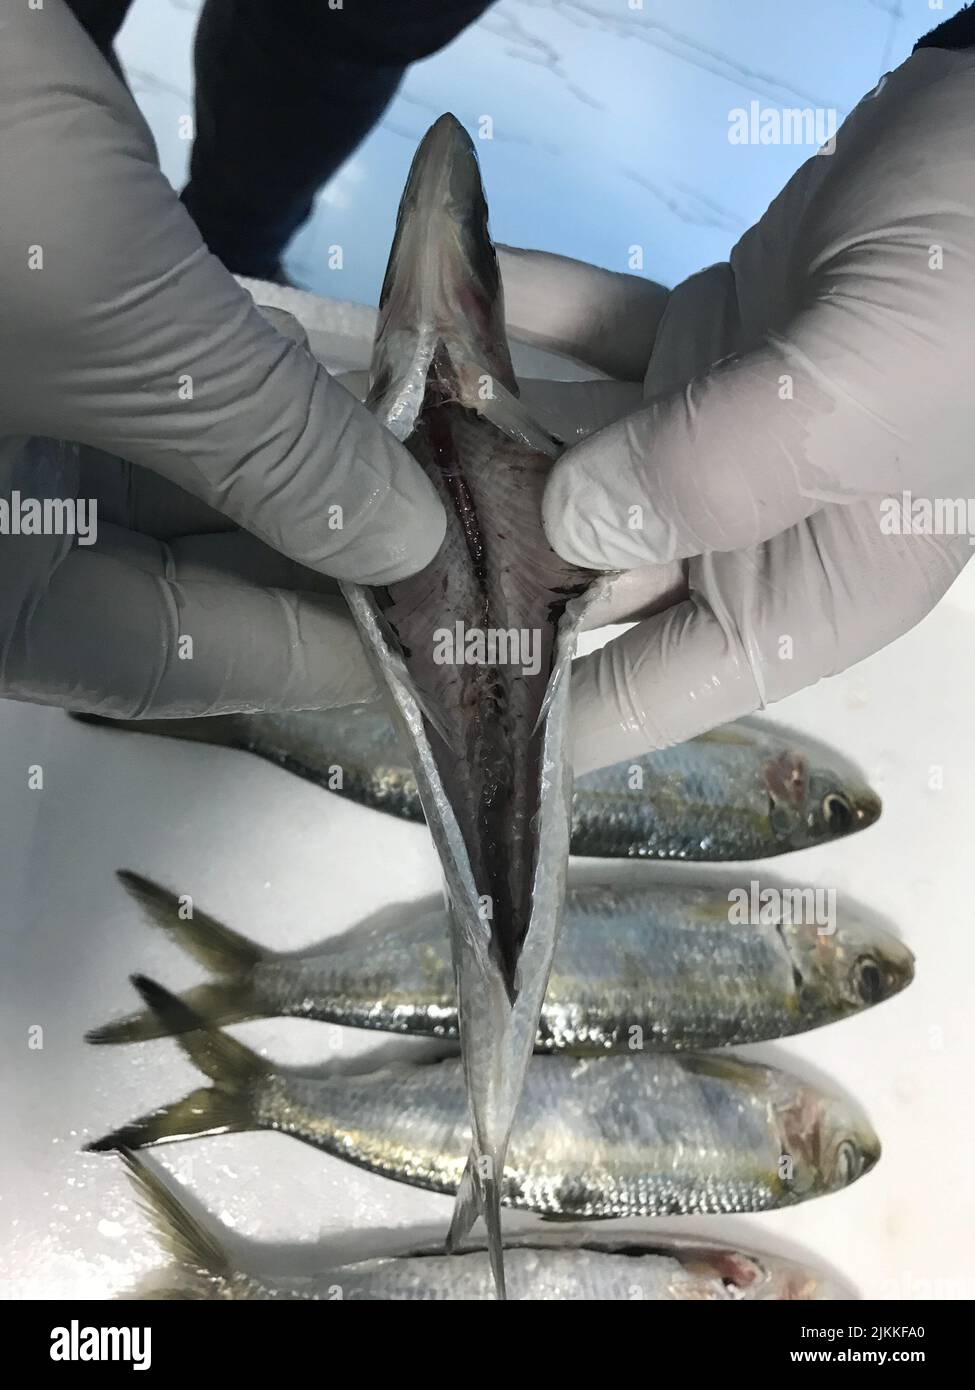 The gloved hands of man holding fresh fish Stock Photo